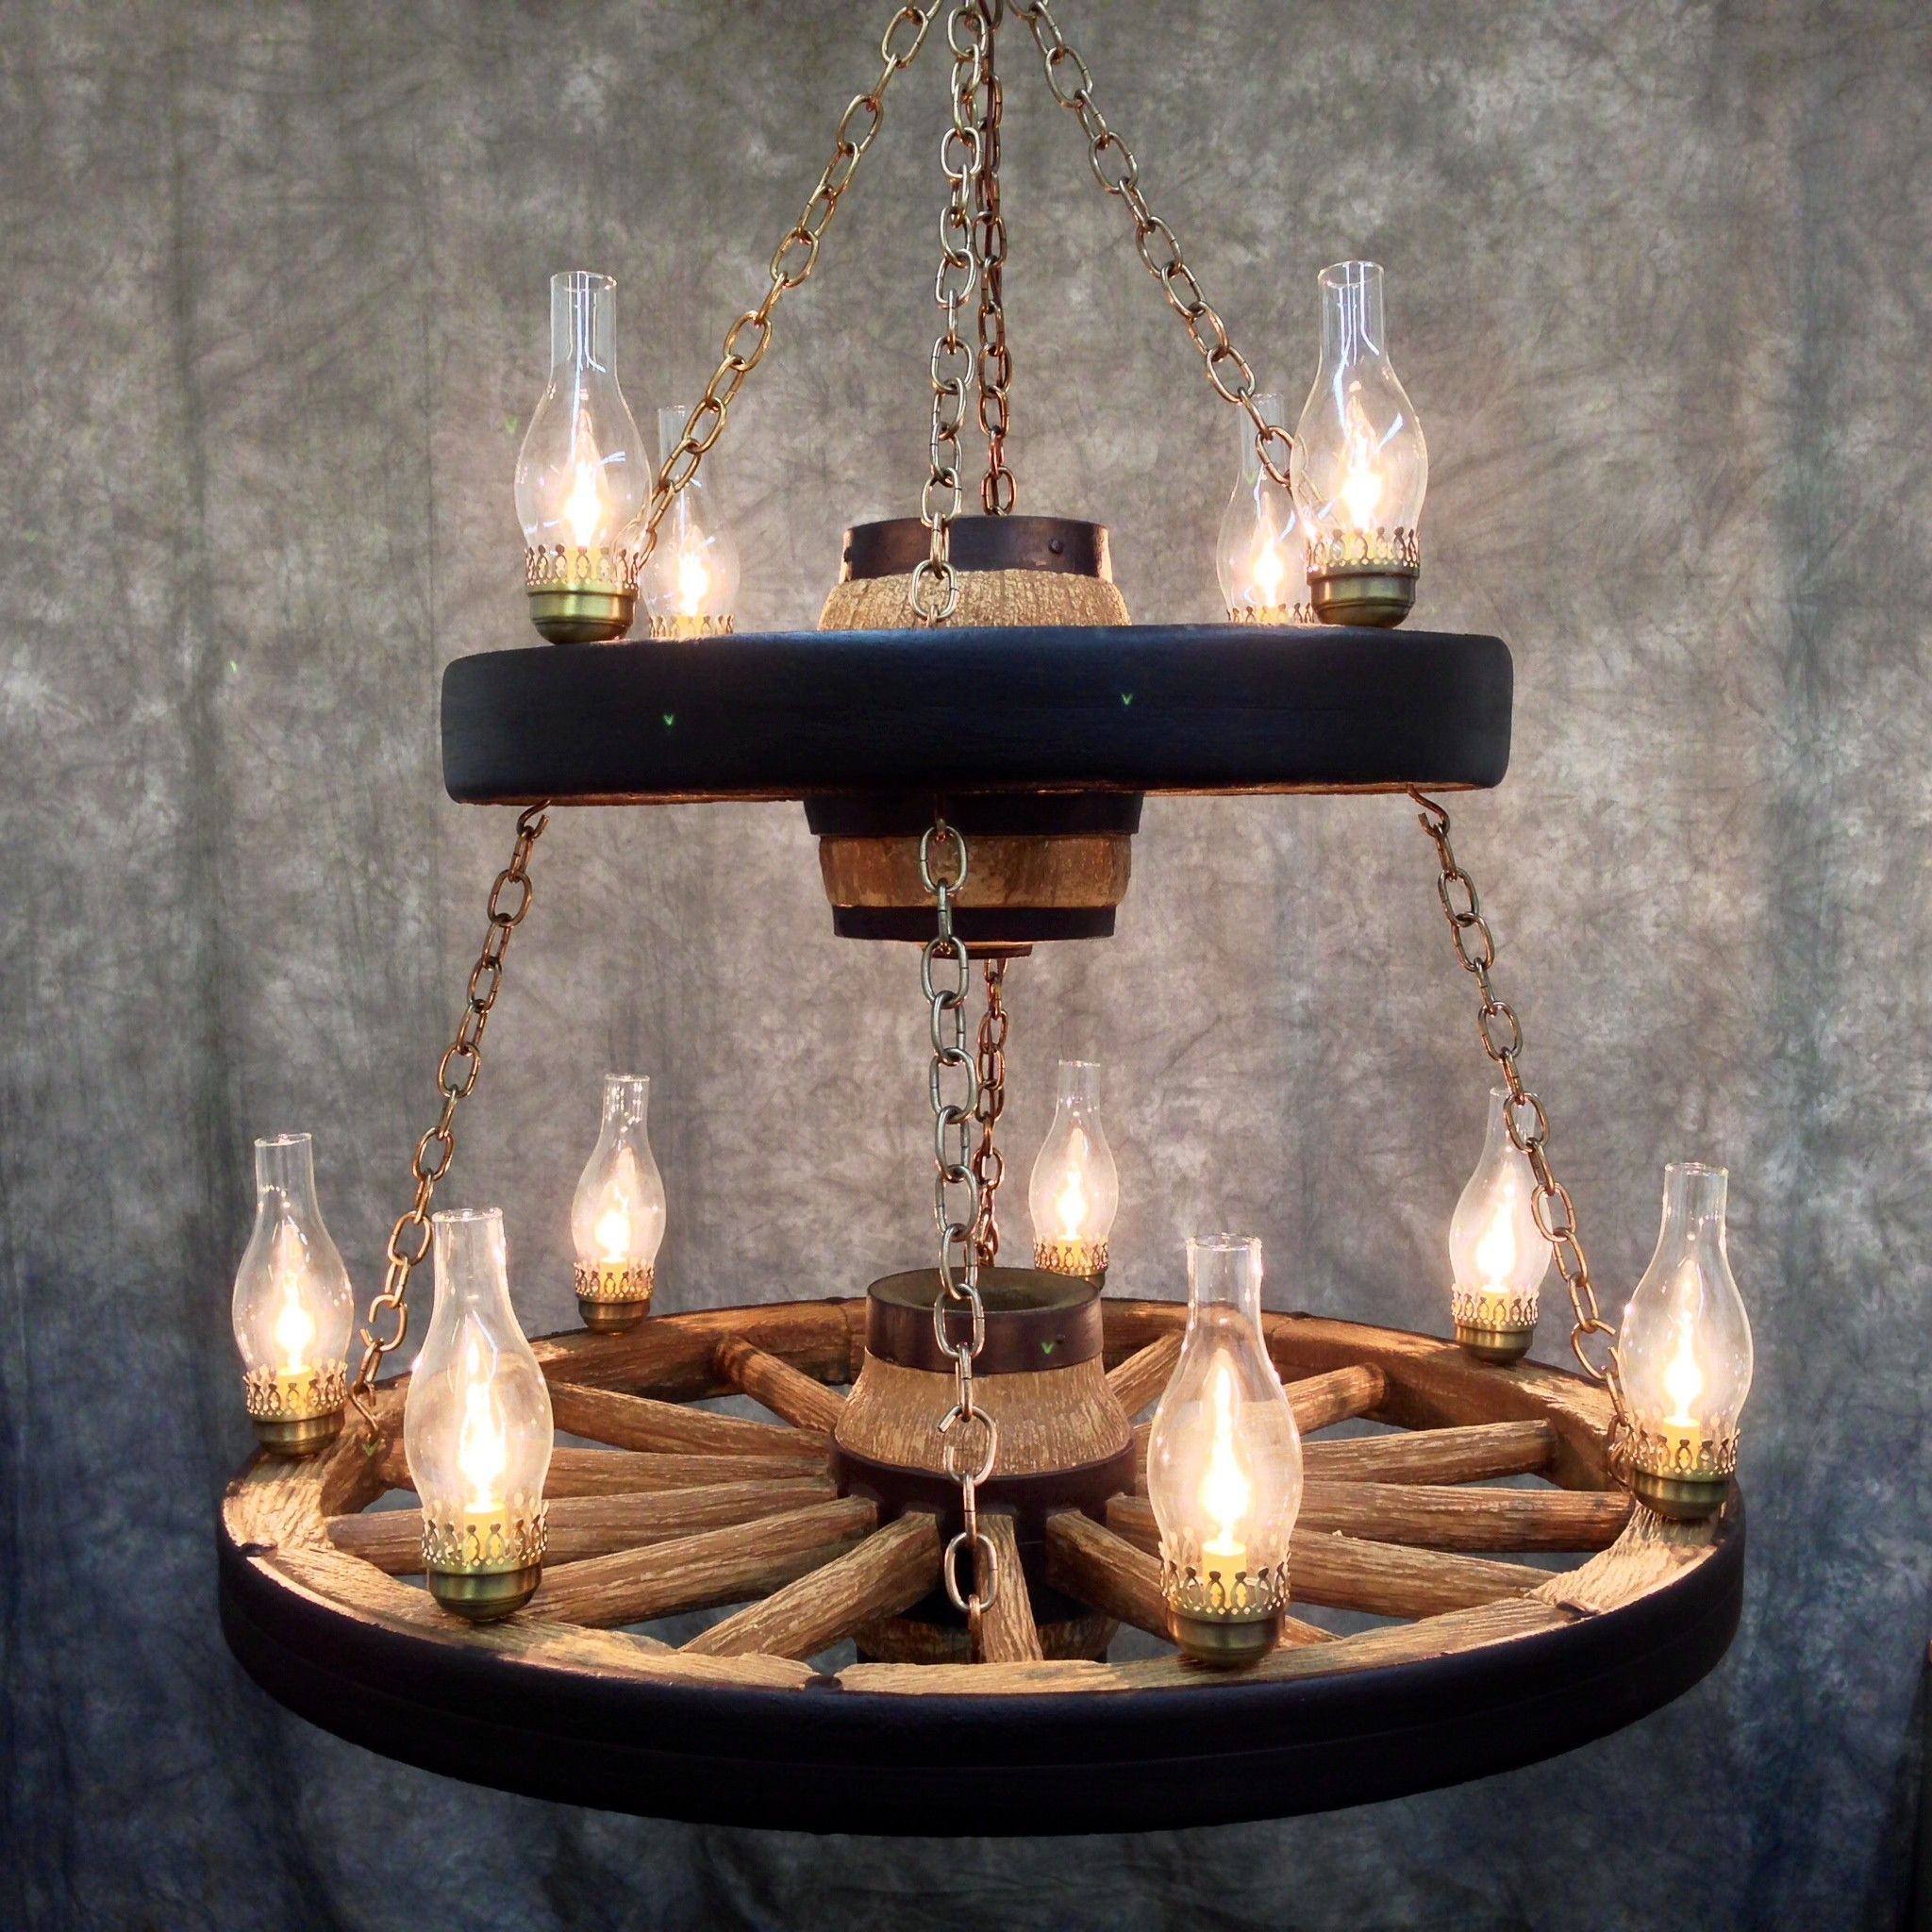 Double Wagon Wheel Chandelier With 11 Chimney Lights In Wood Ring Modern Wagon Wheel Chandeliers (View 13 of 15)